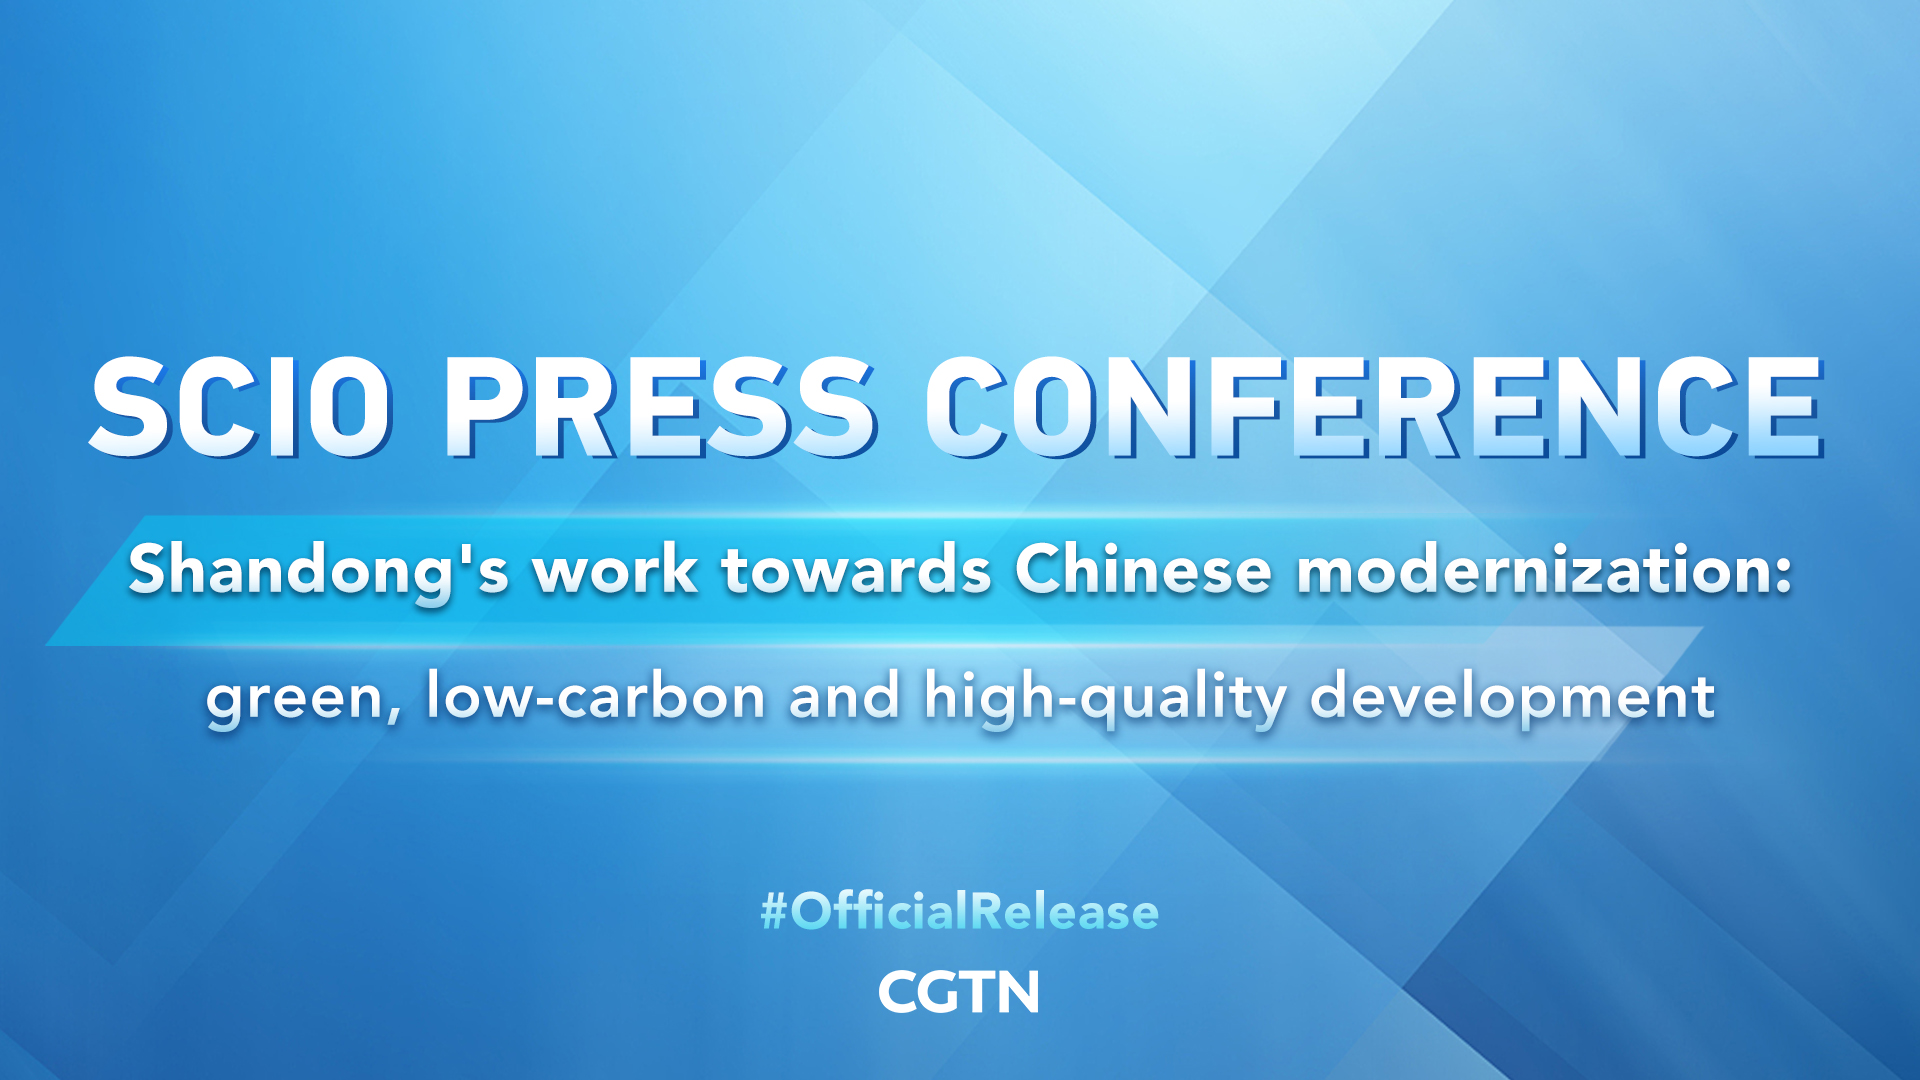 Live: Press conference on Shandong's work towards Chinese modernization